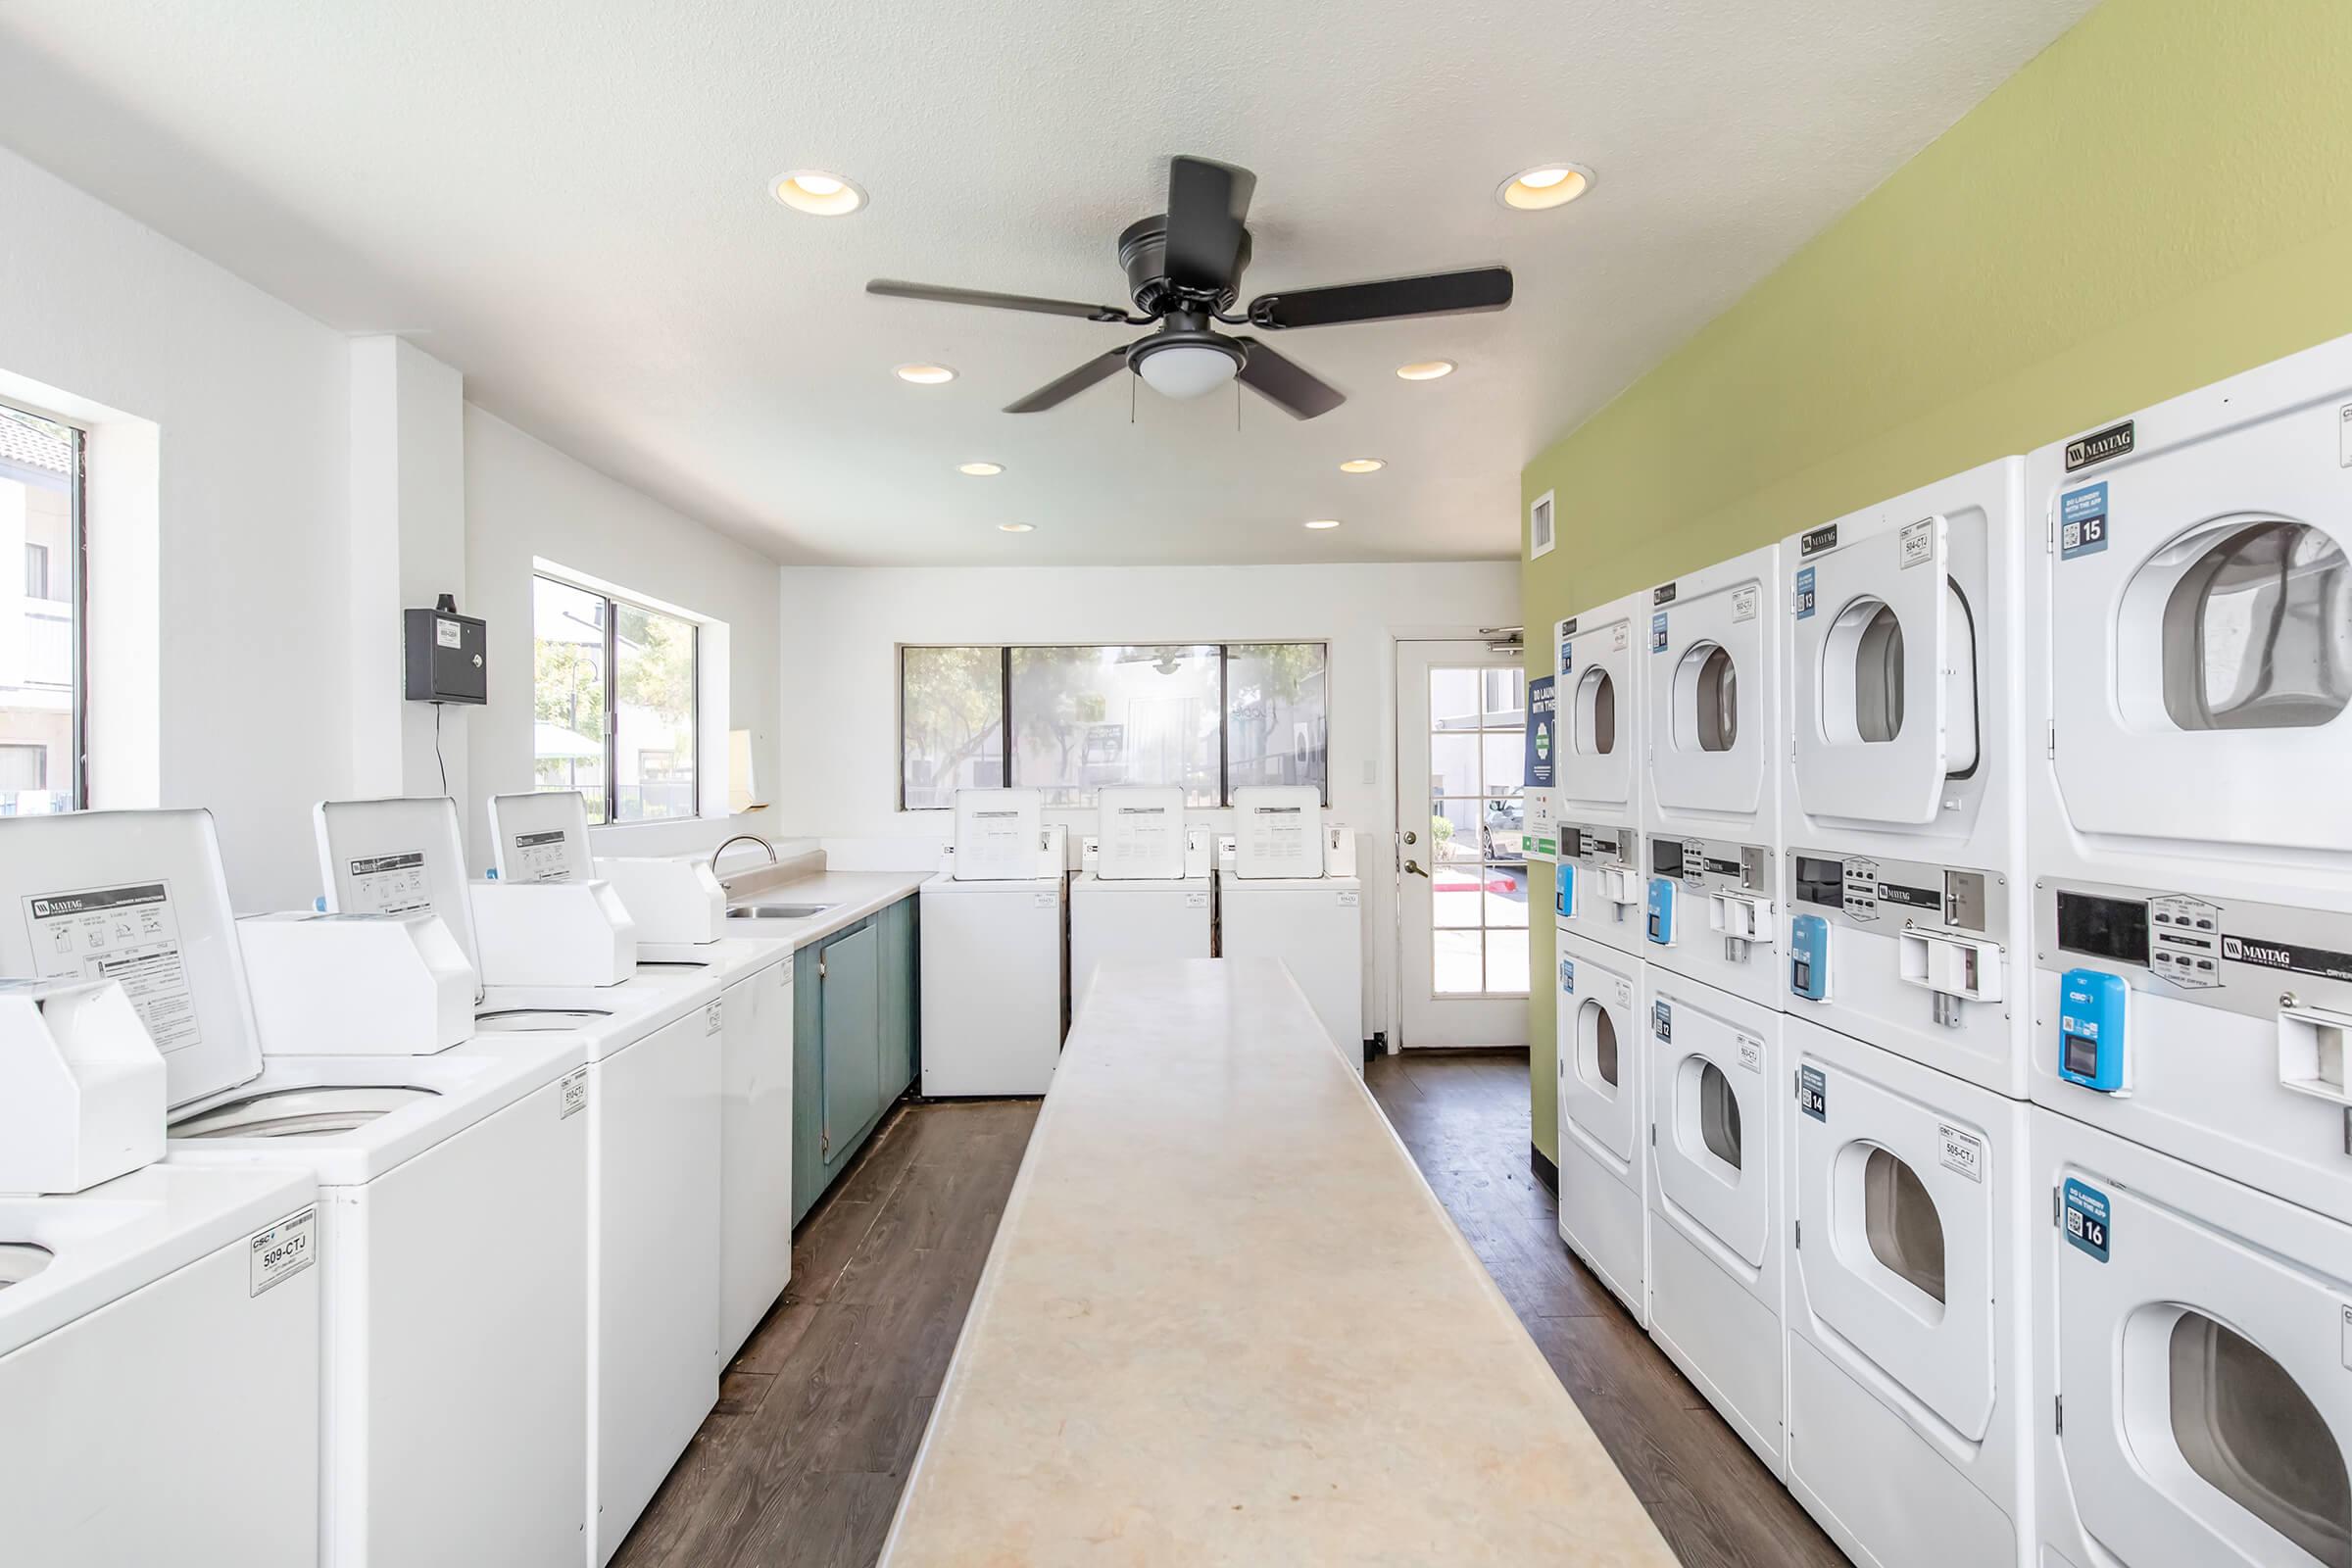 A laundry room with many washers and dryers for the apartments at Rise on MCclintock.